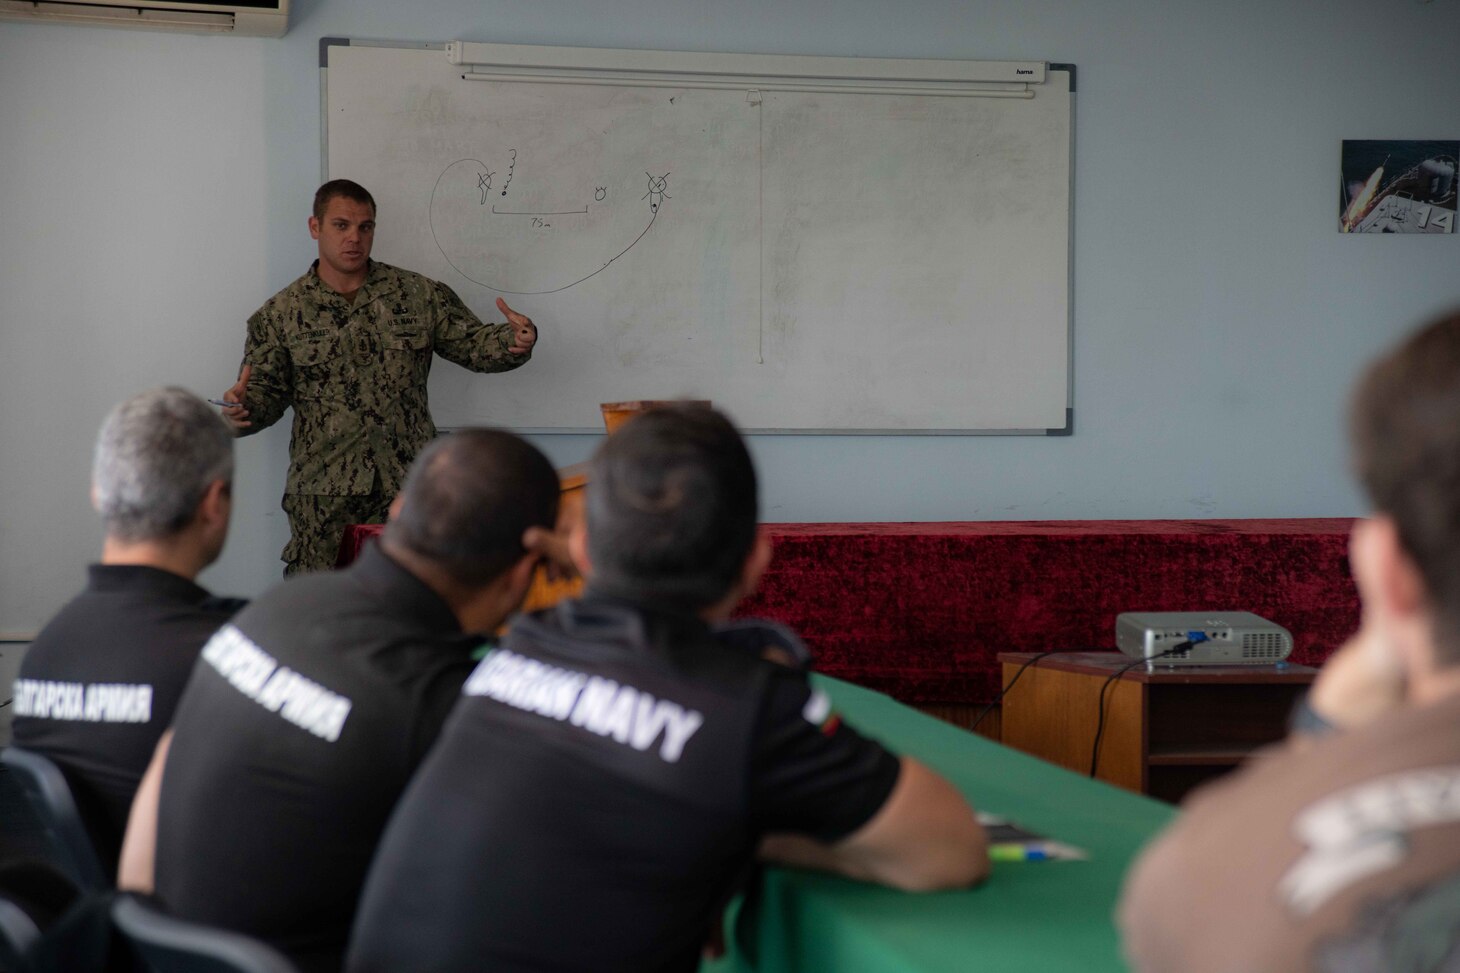 Senior Chief Explosive Ordnance Disposal Matthew Kuttenkuler, assigned to Explosive Ordnance Disposal Mobile Unit (EODMU) 12, delivers a brief on U.S. floating mine response procedures to Bulgarian Sailors as part of a knowledge exchange between the two nations during exercise Breeze 2022, July 14, 2022. Breeze 2022 enhances interoperability among Bulgaria and participating nations, with an emphasis on anti-submarine warfare, search and rescue, force protection/anti-terrorism operations, maritime interdiction operations, and anti-piracy mission areas.